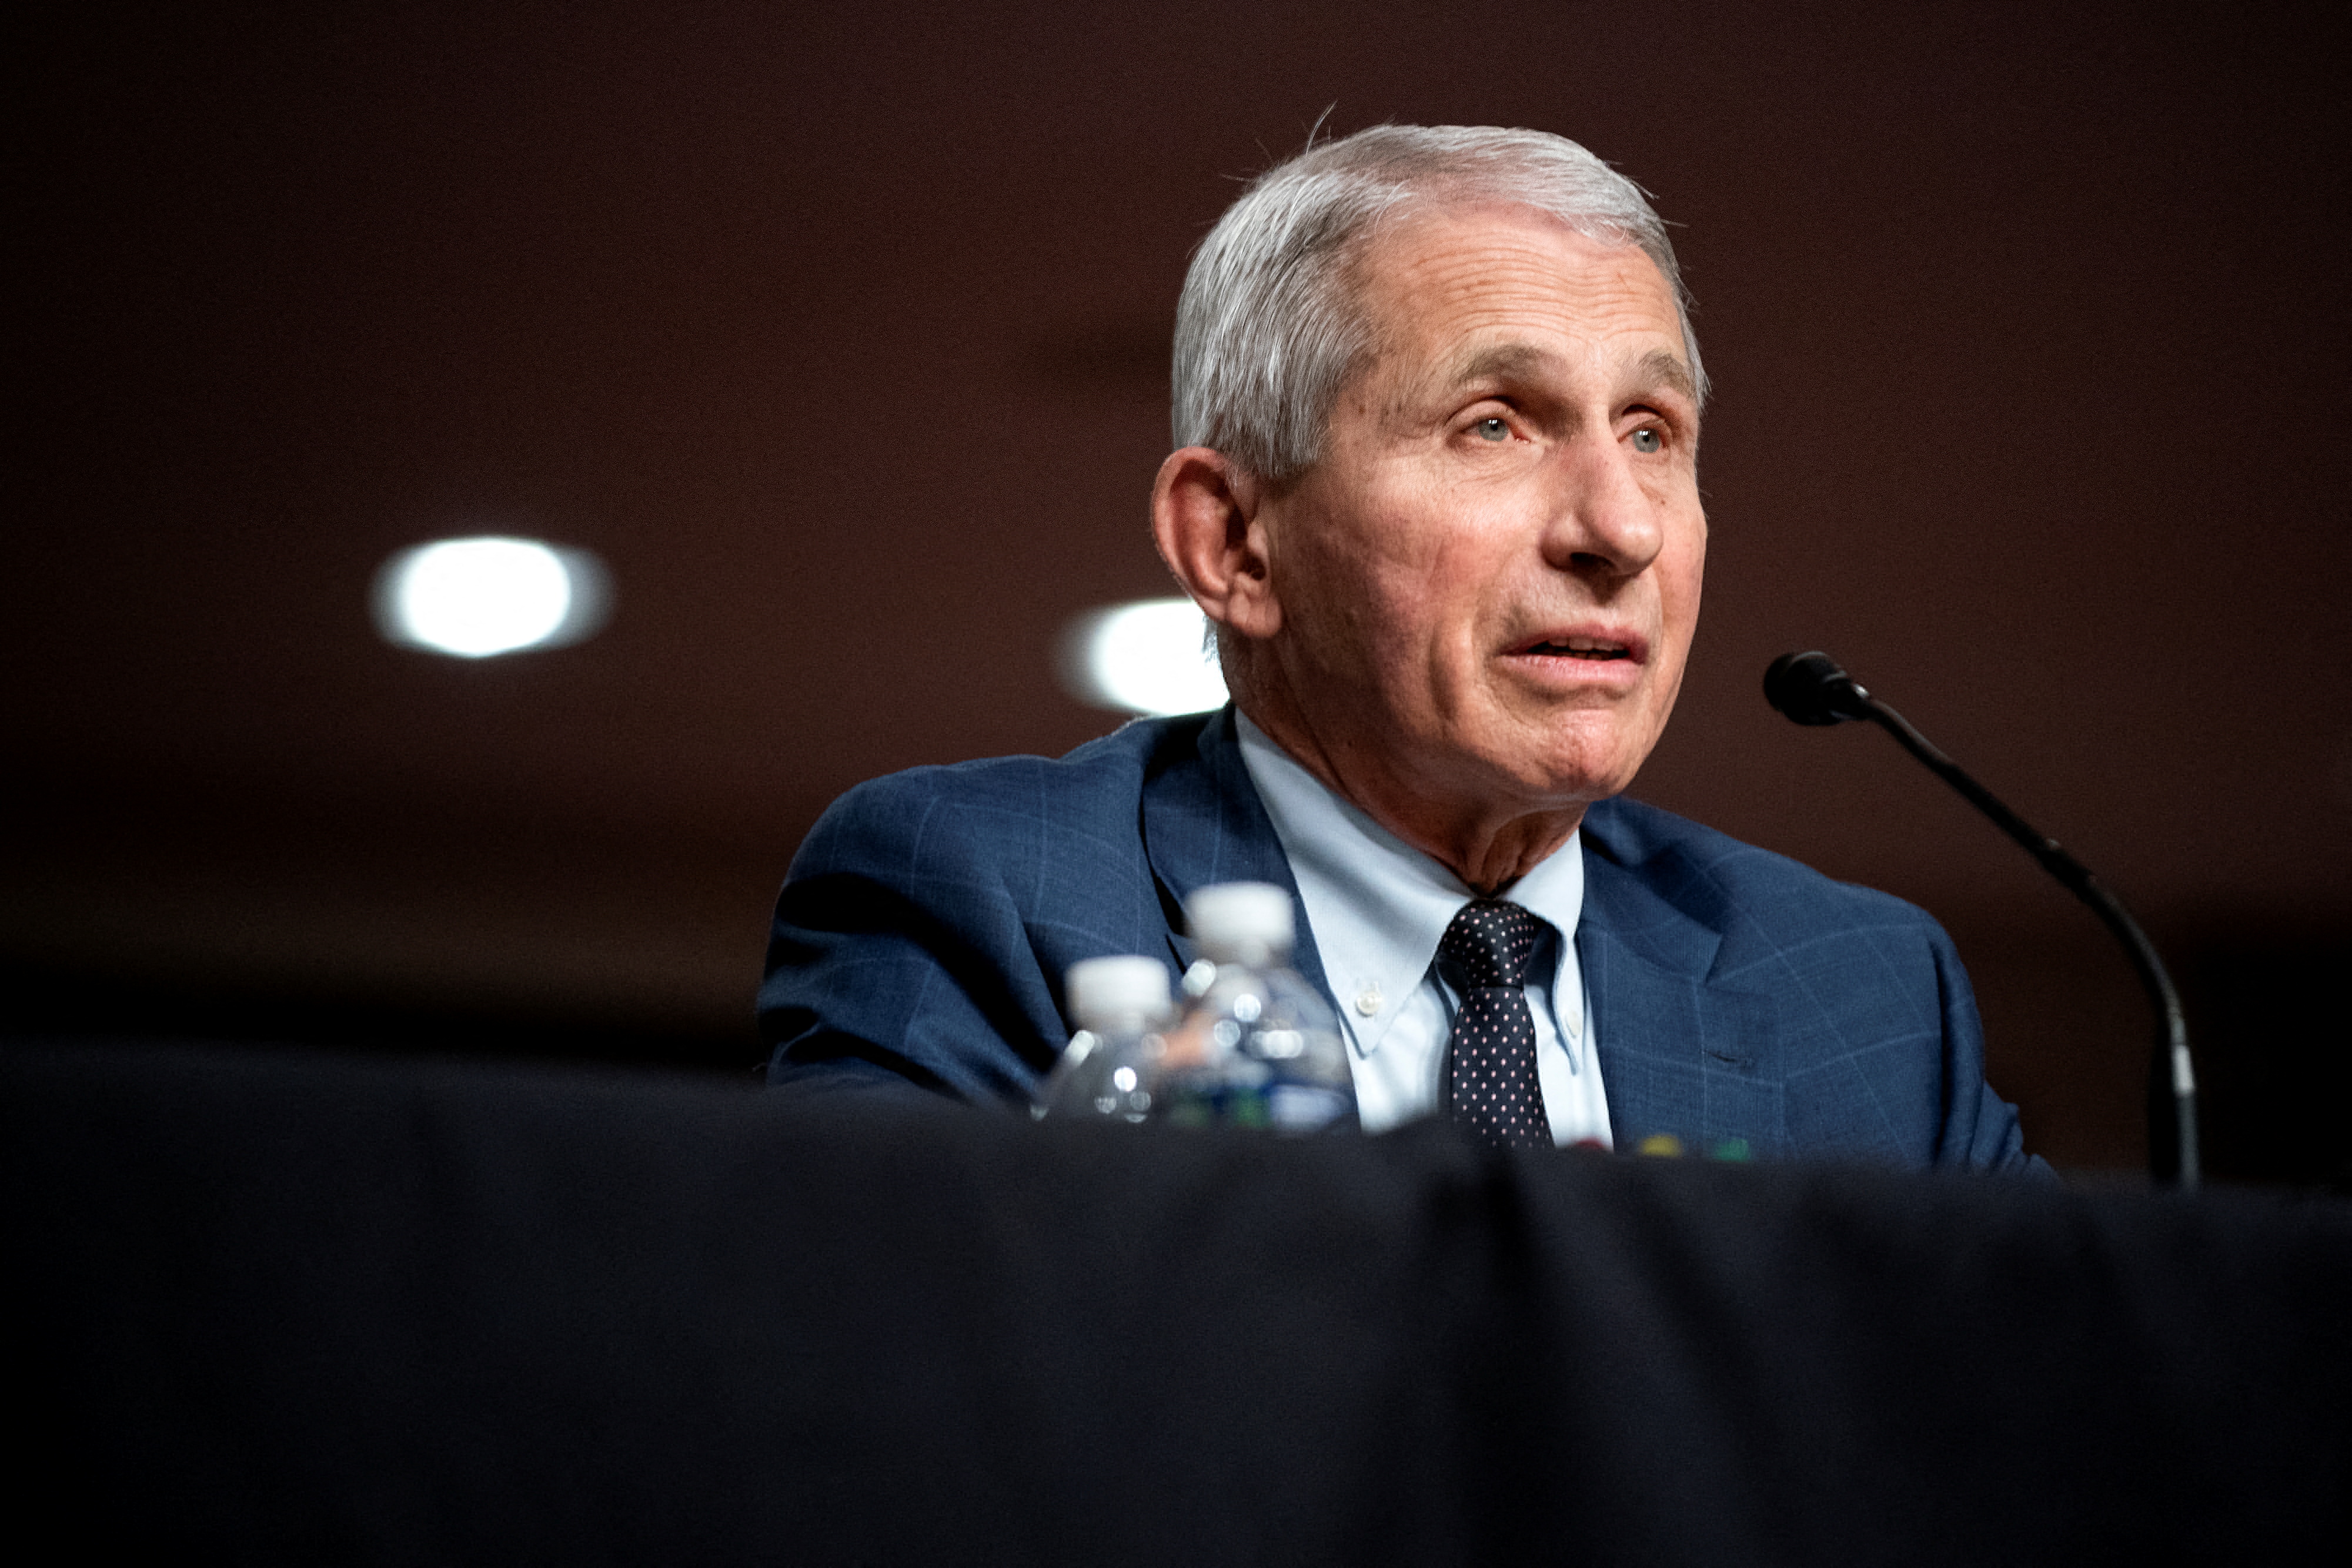 Dr. Anthony Fauci to Step Down from Government Posts